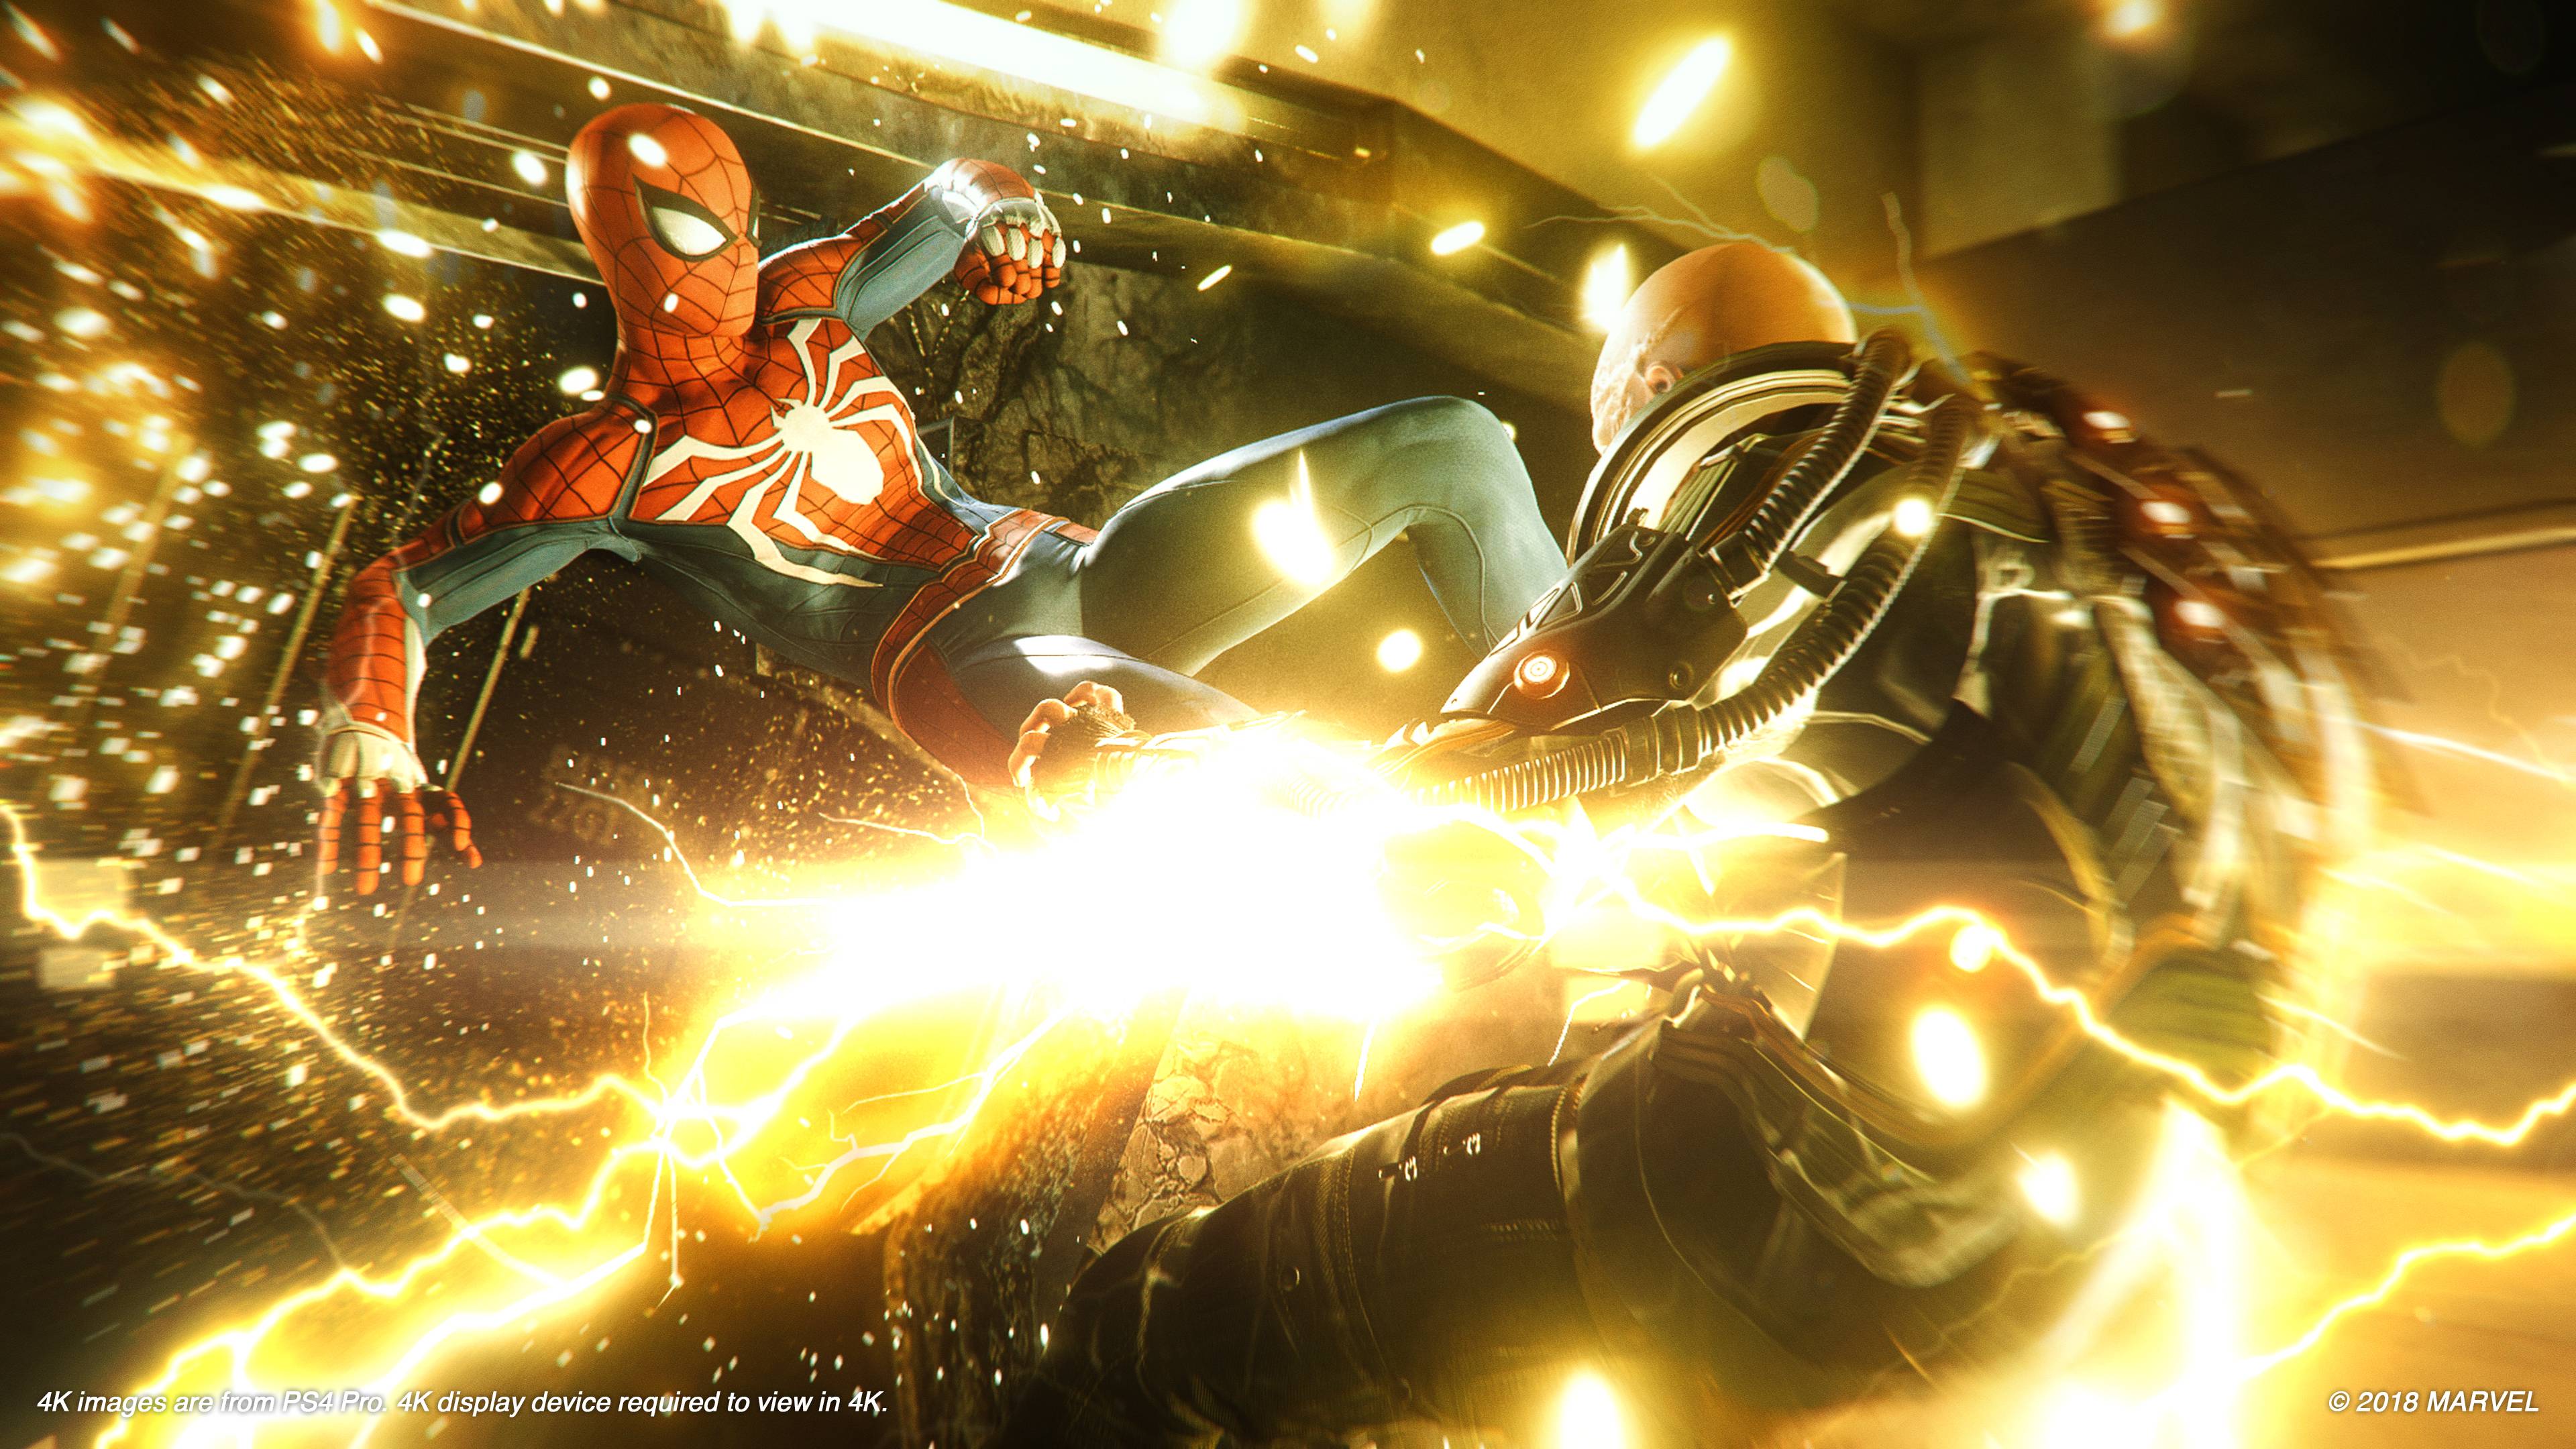 Marvel's Spider-Man: Game of the Year Edition - PlayStation 4 - image 2 of 3